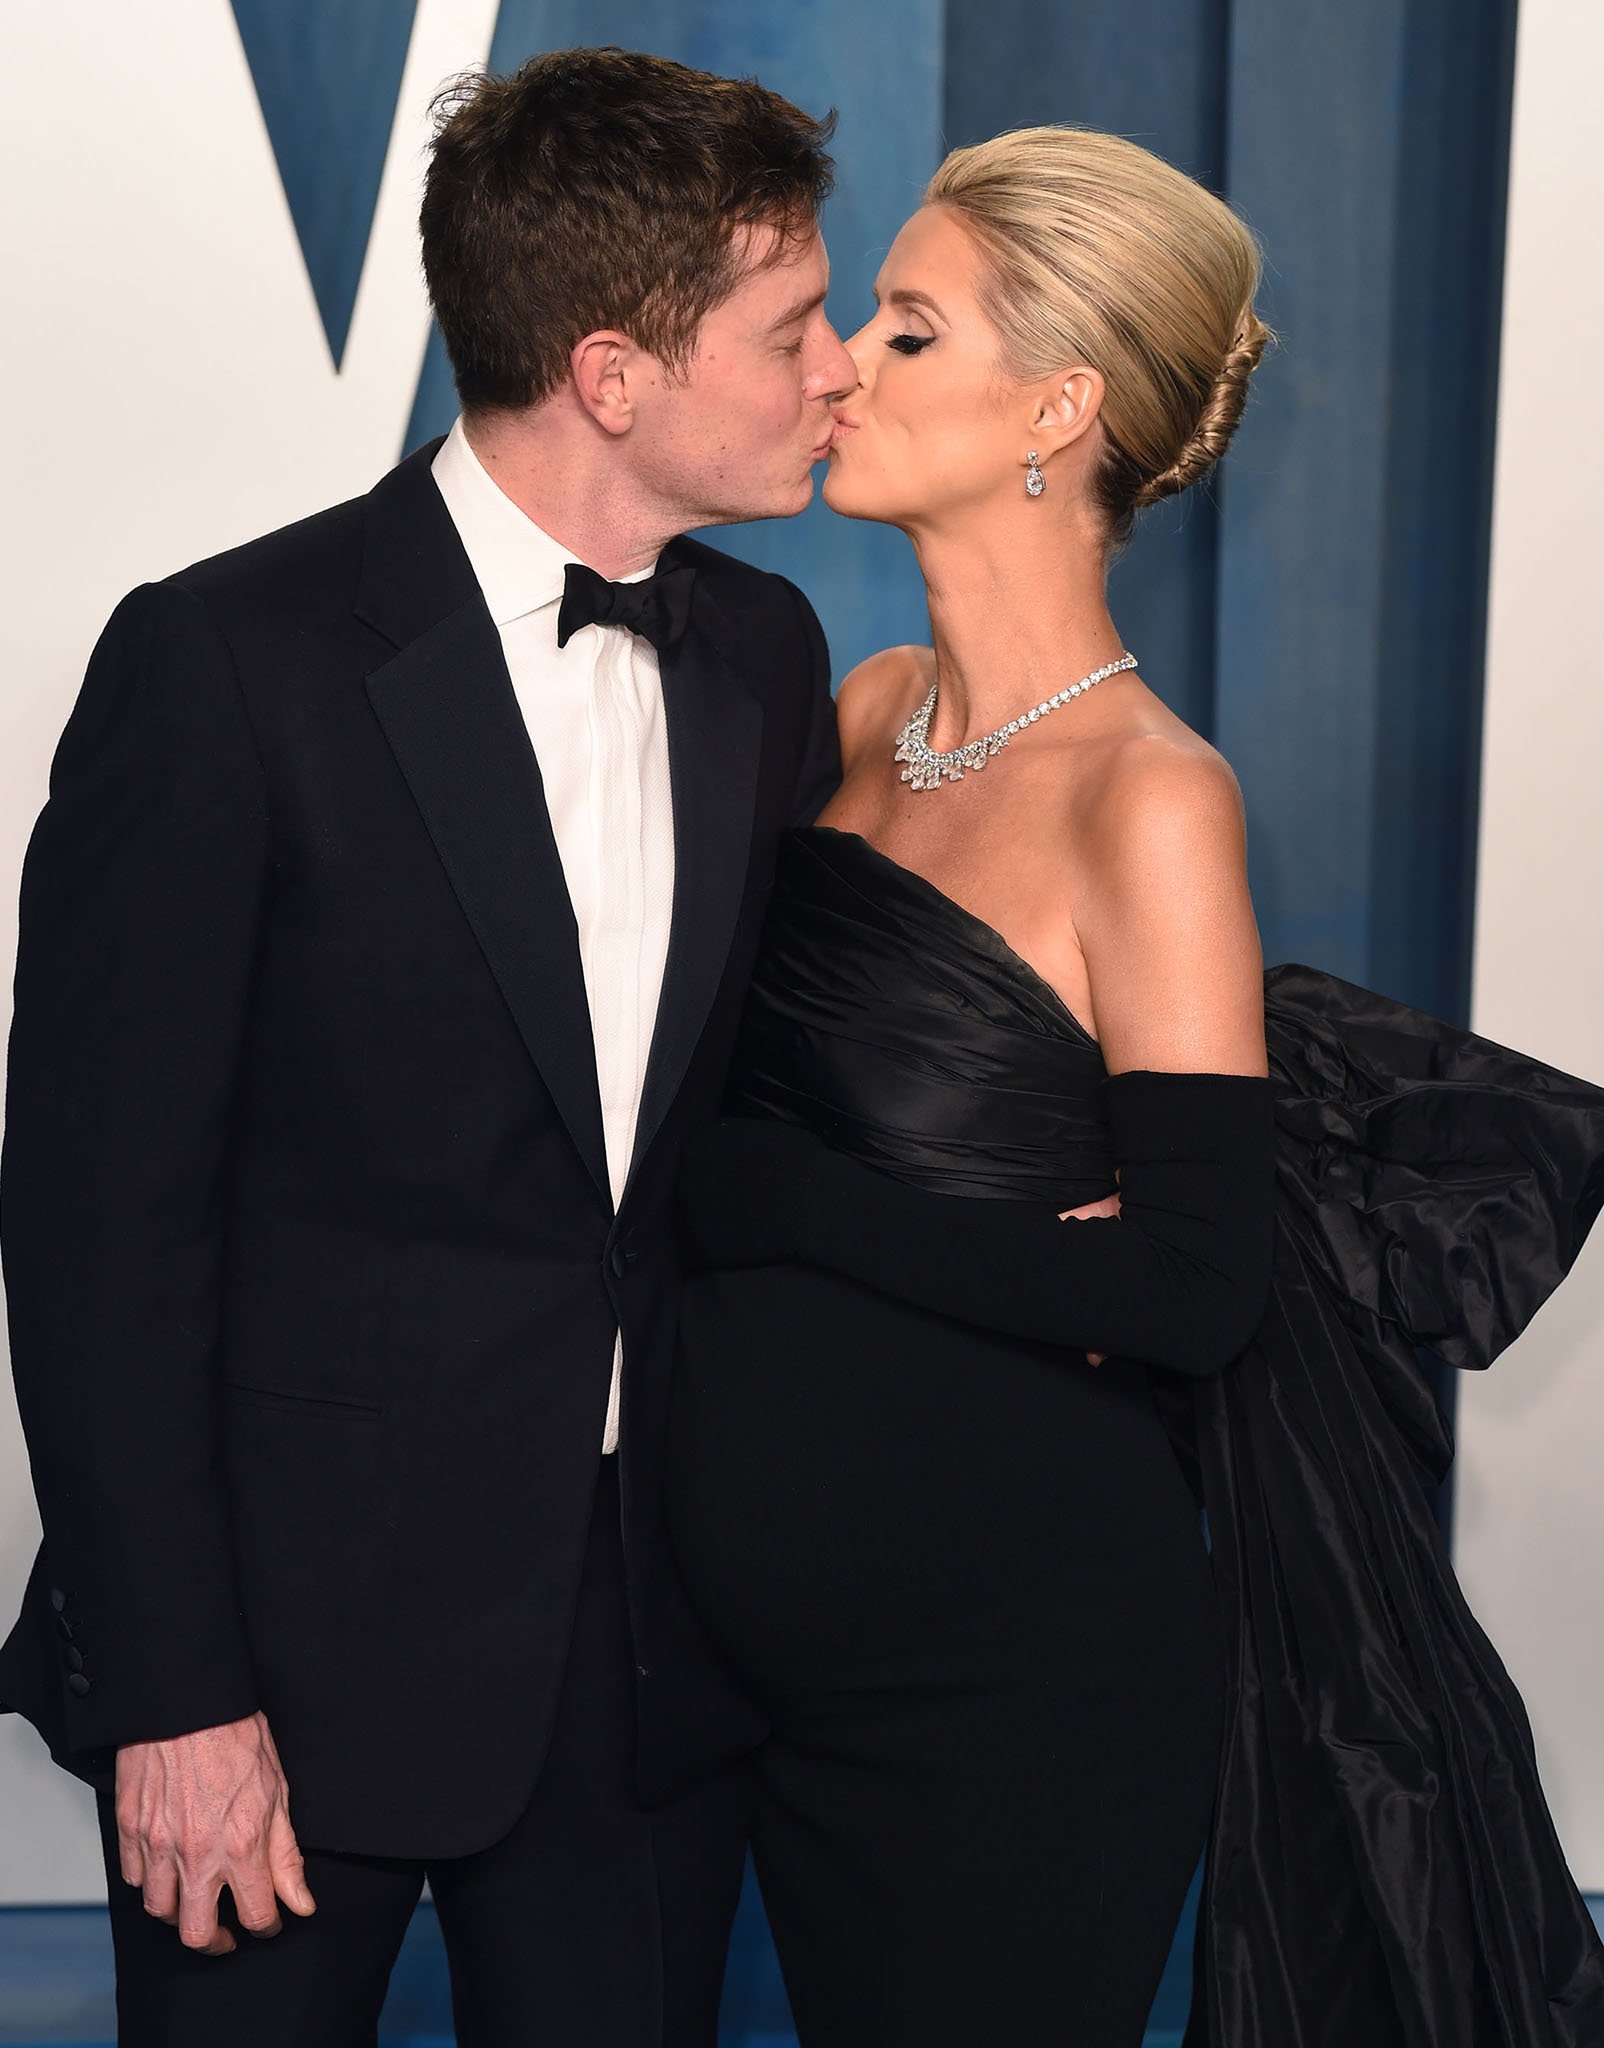 James Rothschild and Nicky Hilton share a kiss on the red carpet